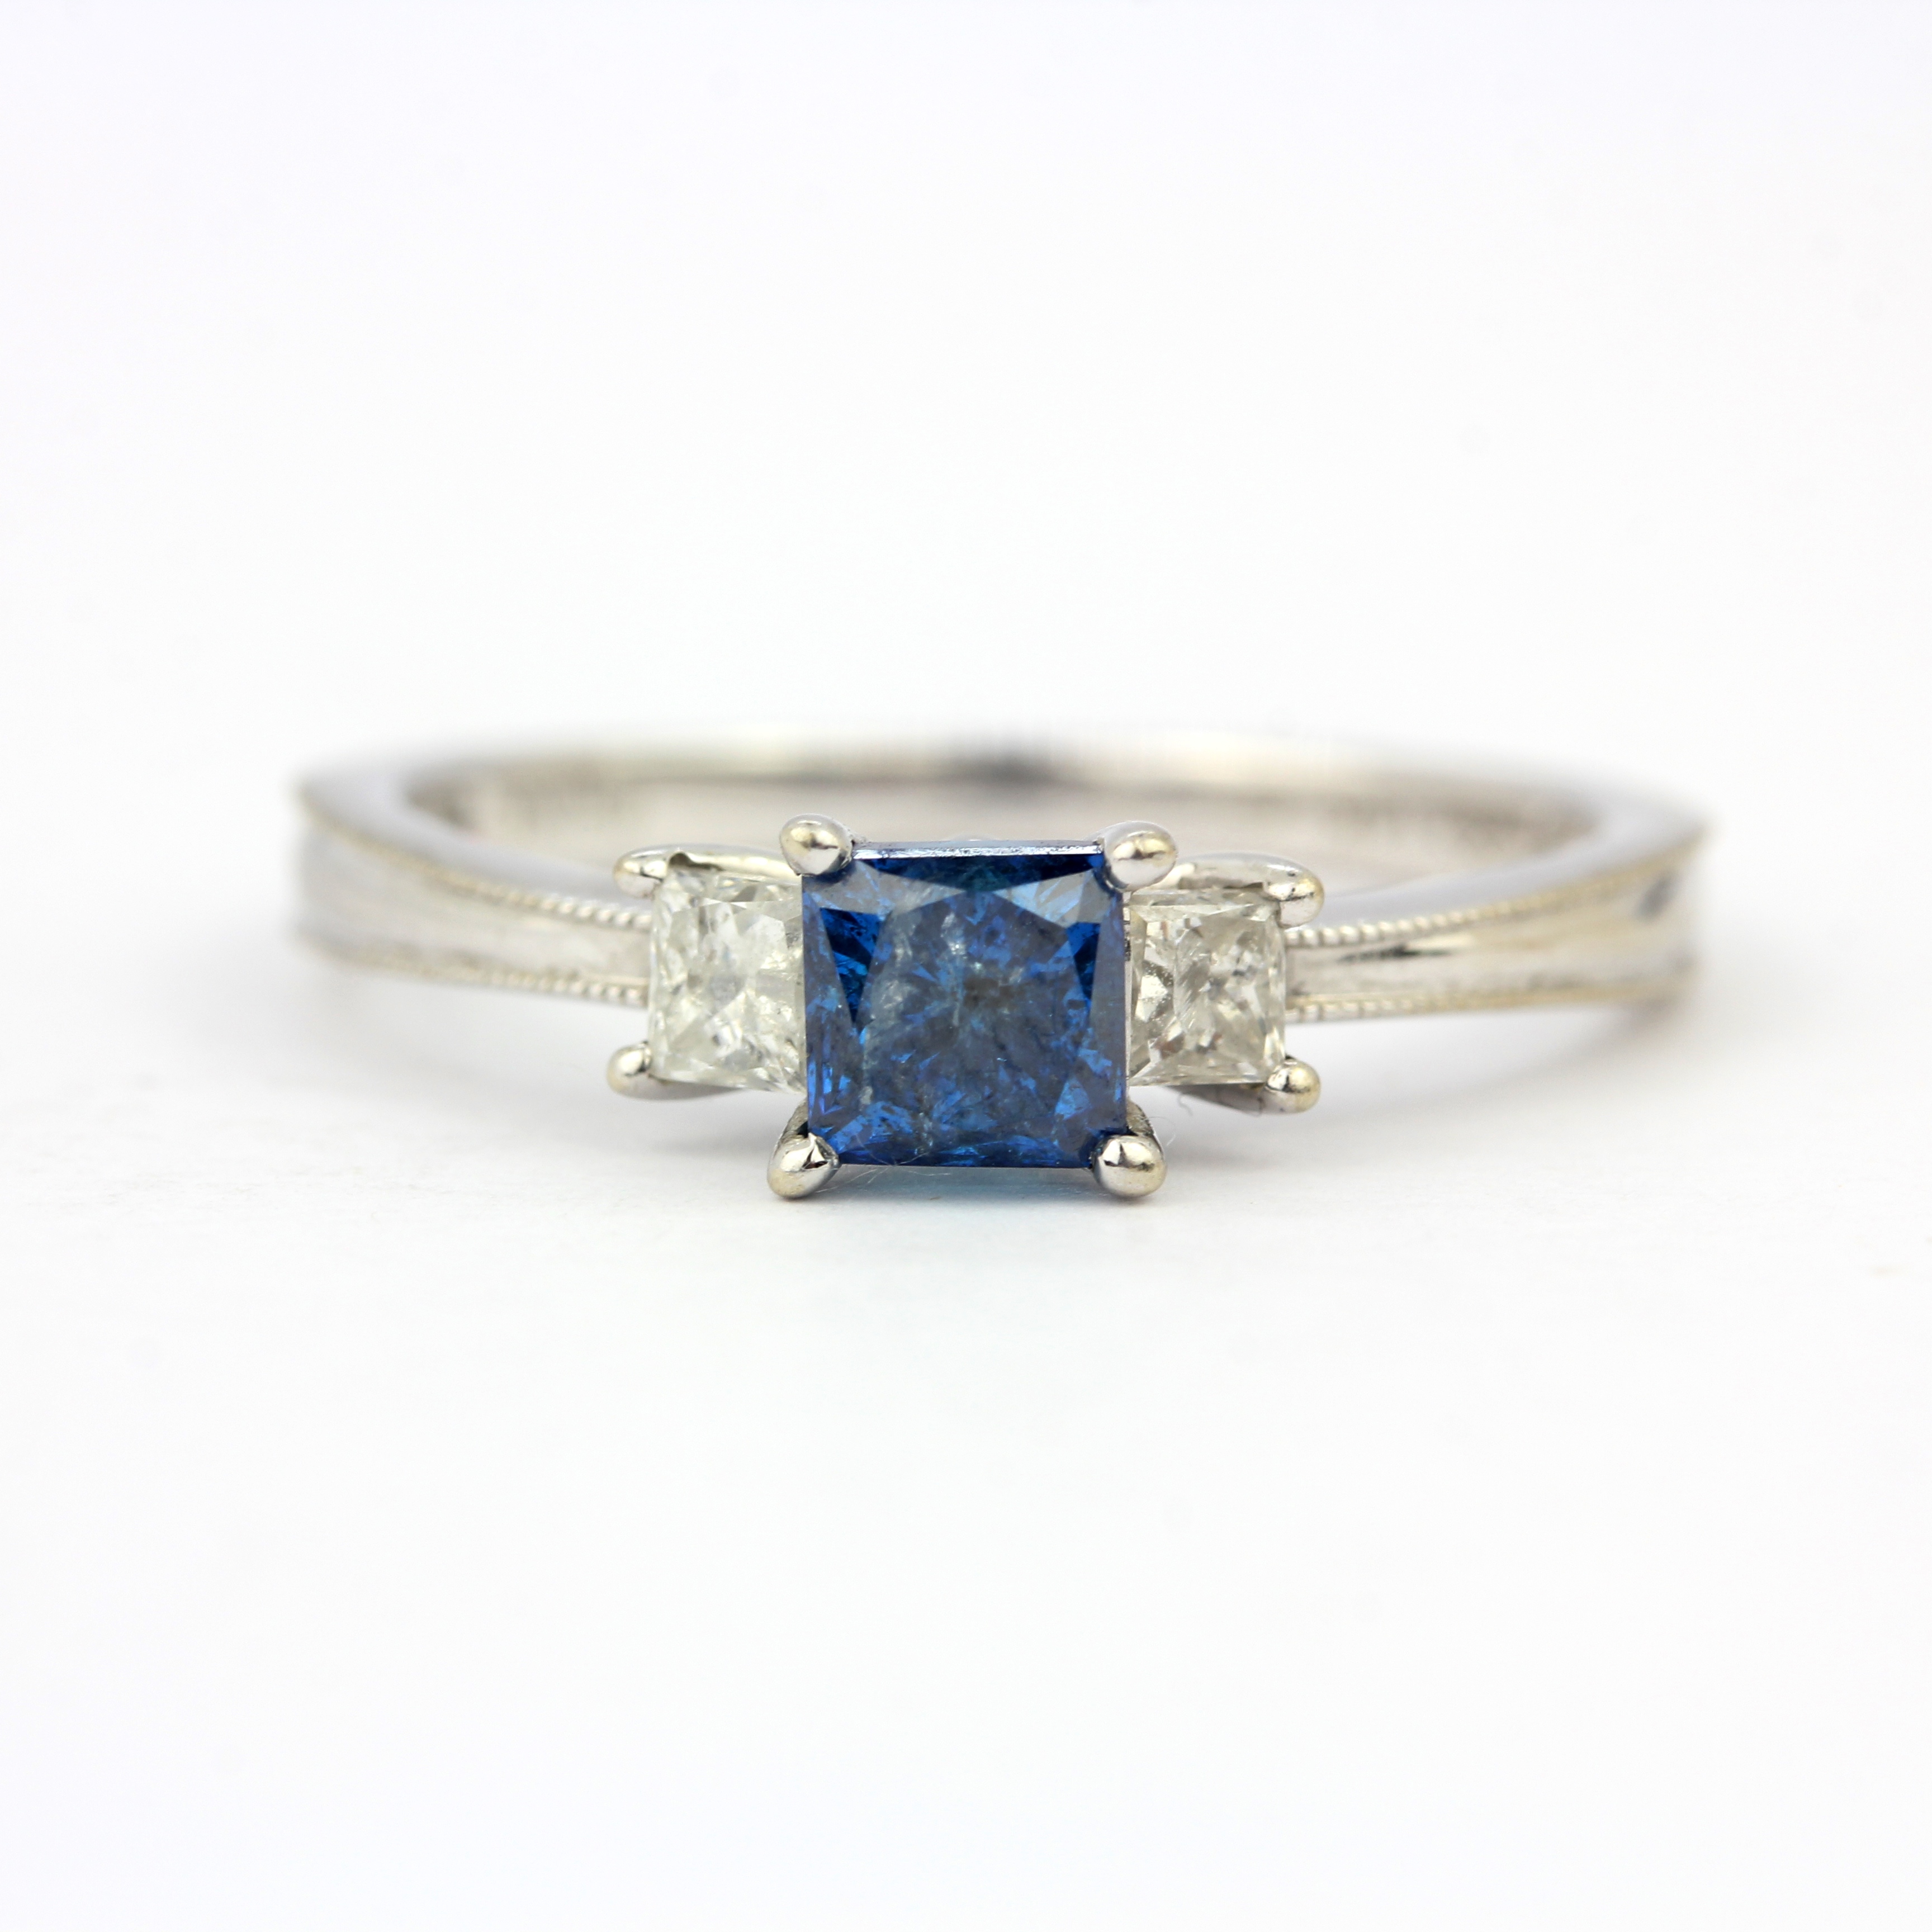 A 14ct white gold ring set with a princess cut fancy blue diamond and princess cut diamond set - Image 3 of 4